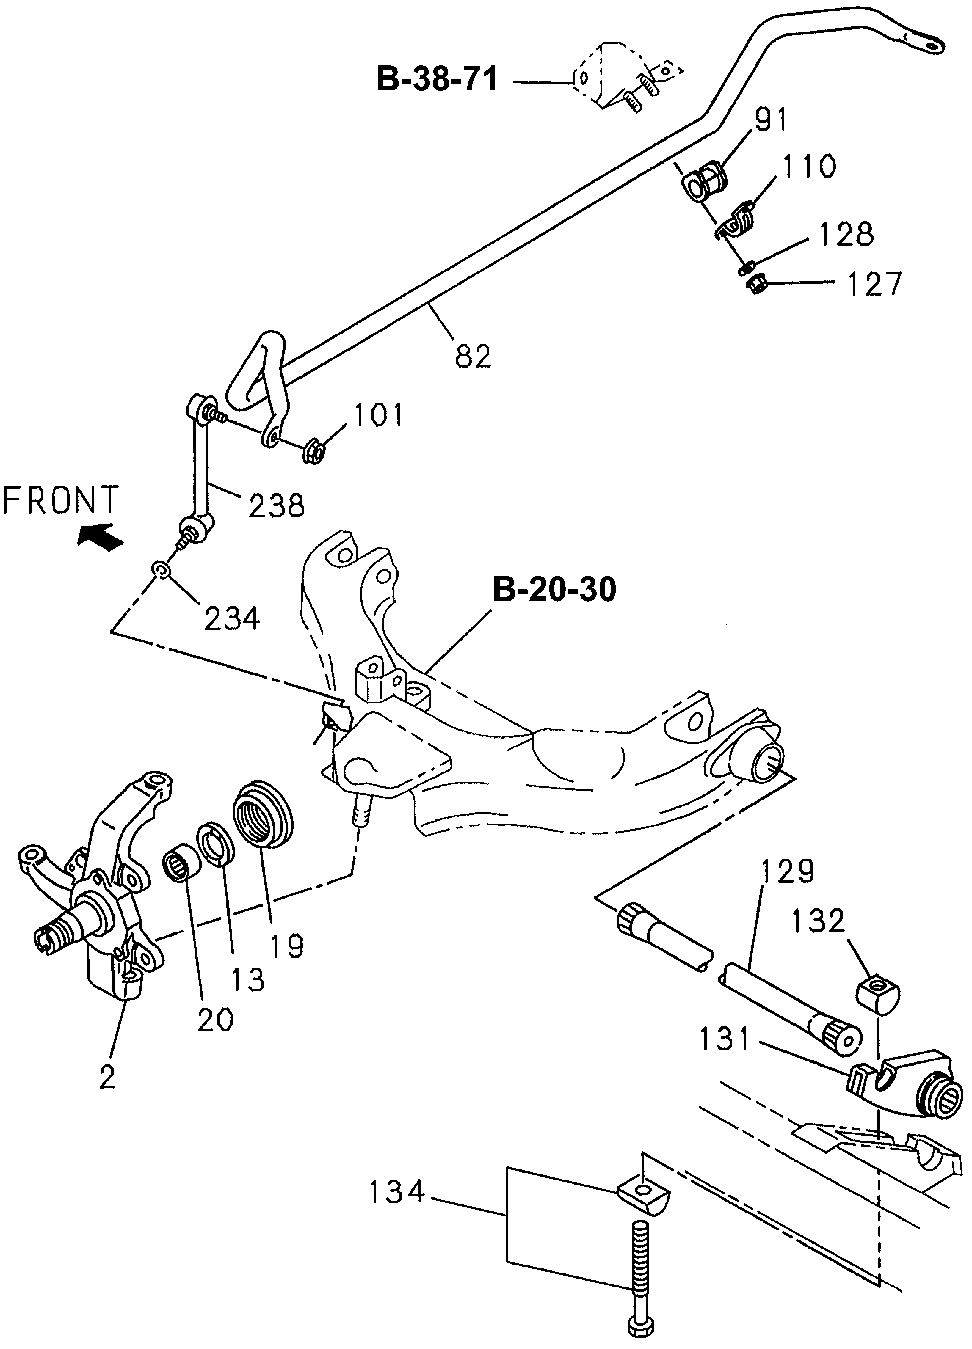 8-97122-163-0 - ARM, R. HEIGHT CONTROL